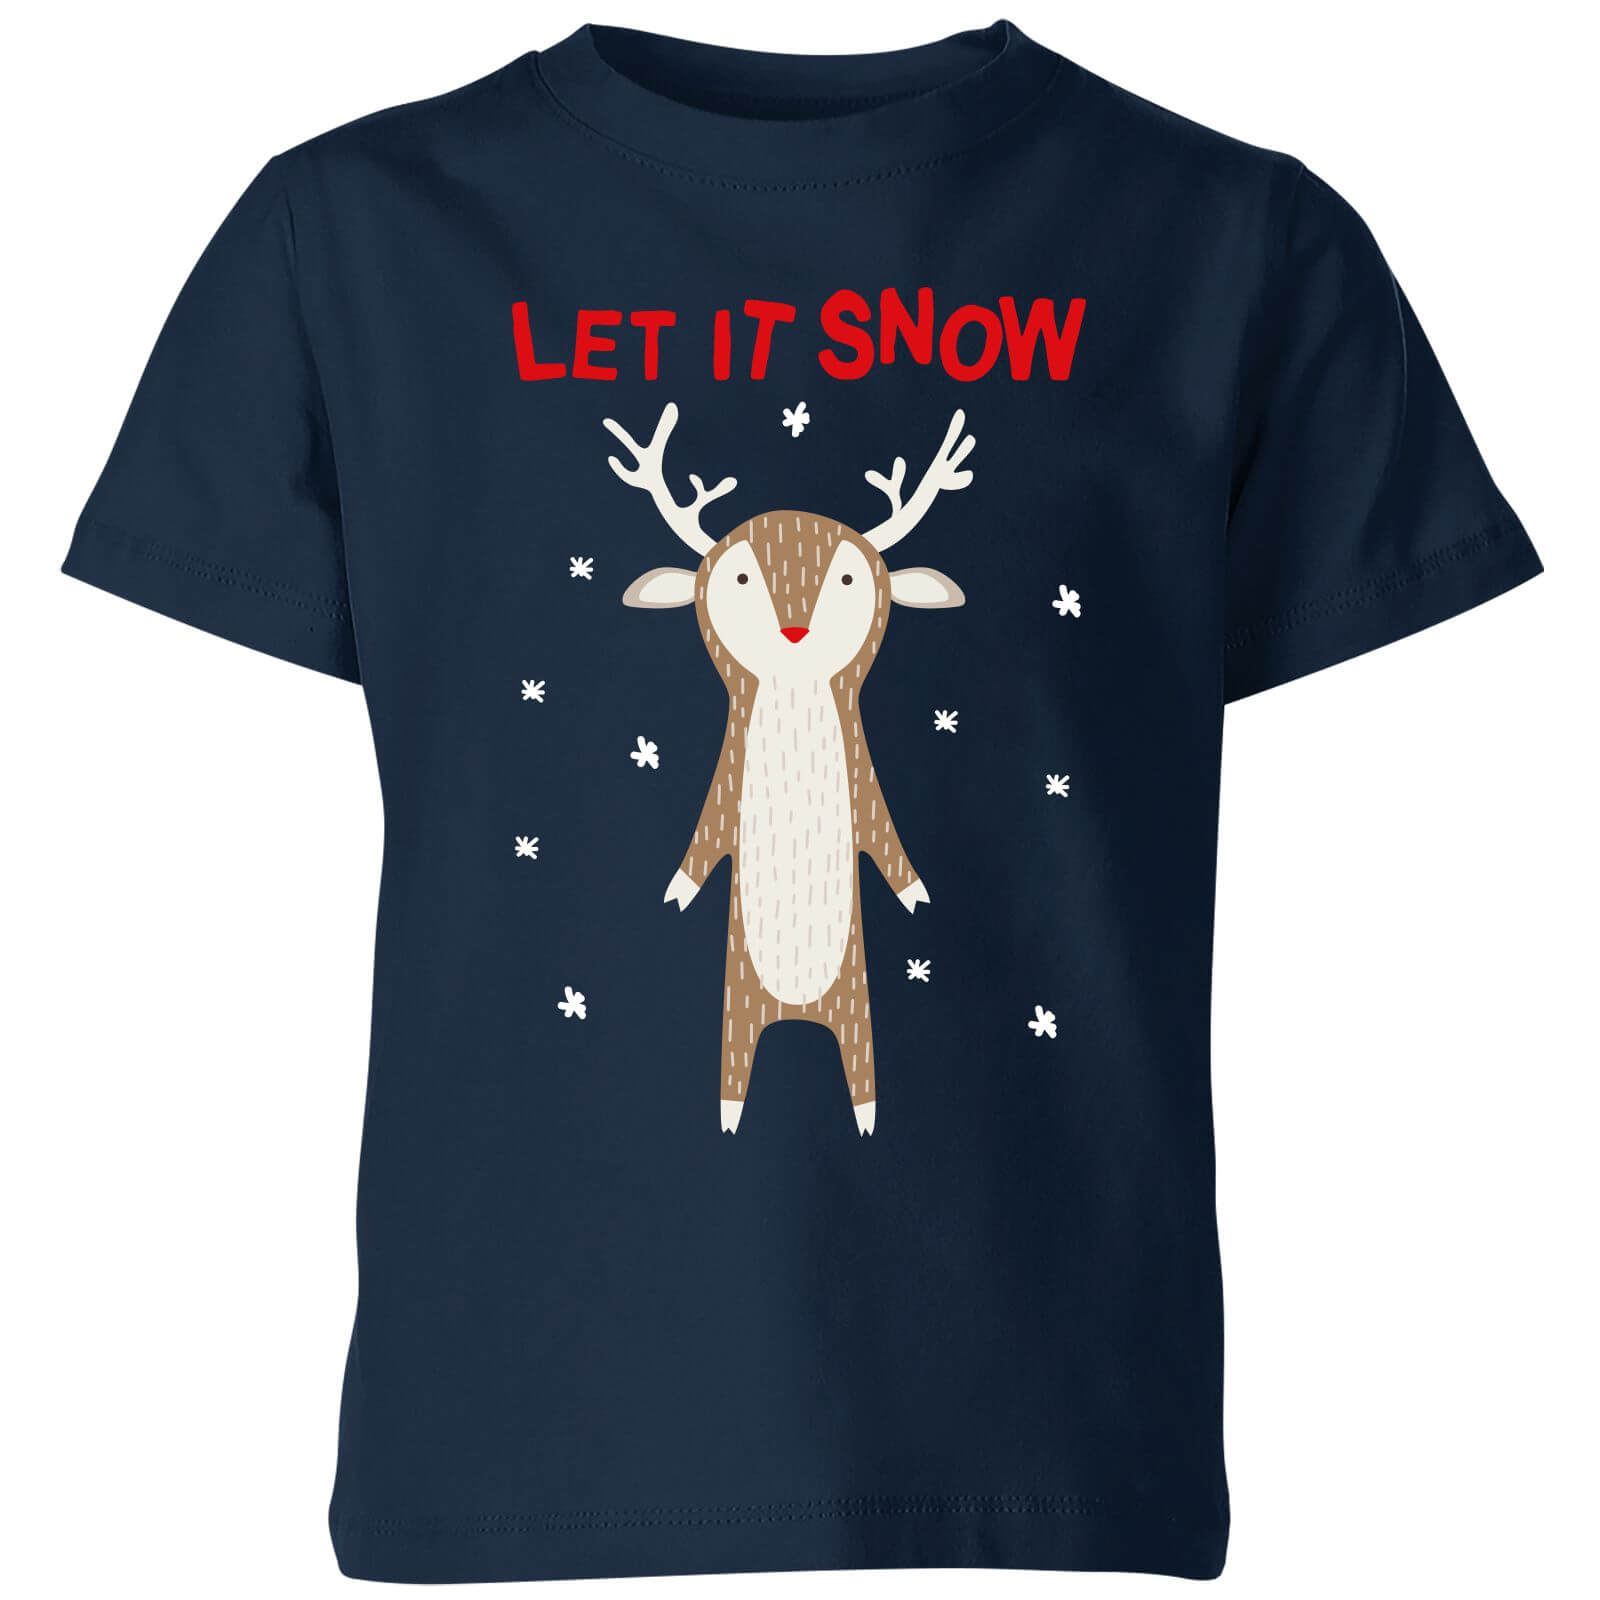 Let It Snow Kids' T-Shirt - Navy - 3-4 Years - Navy